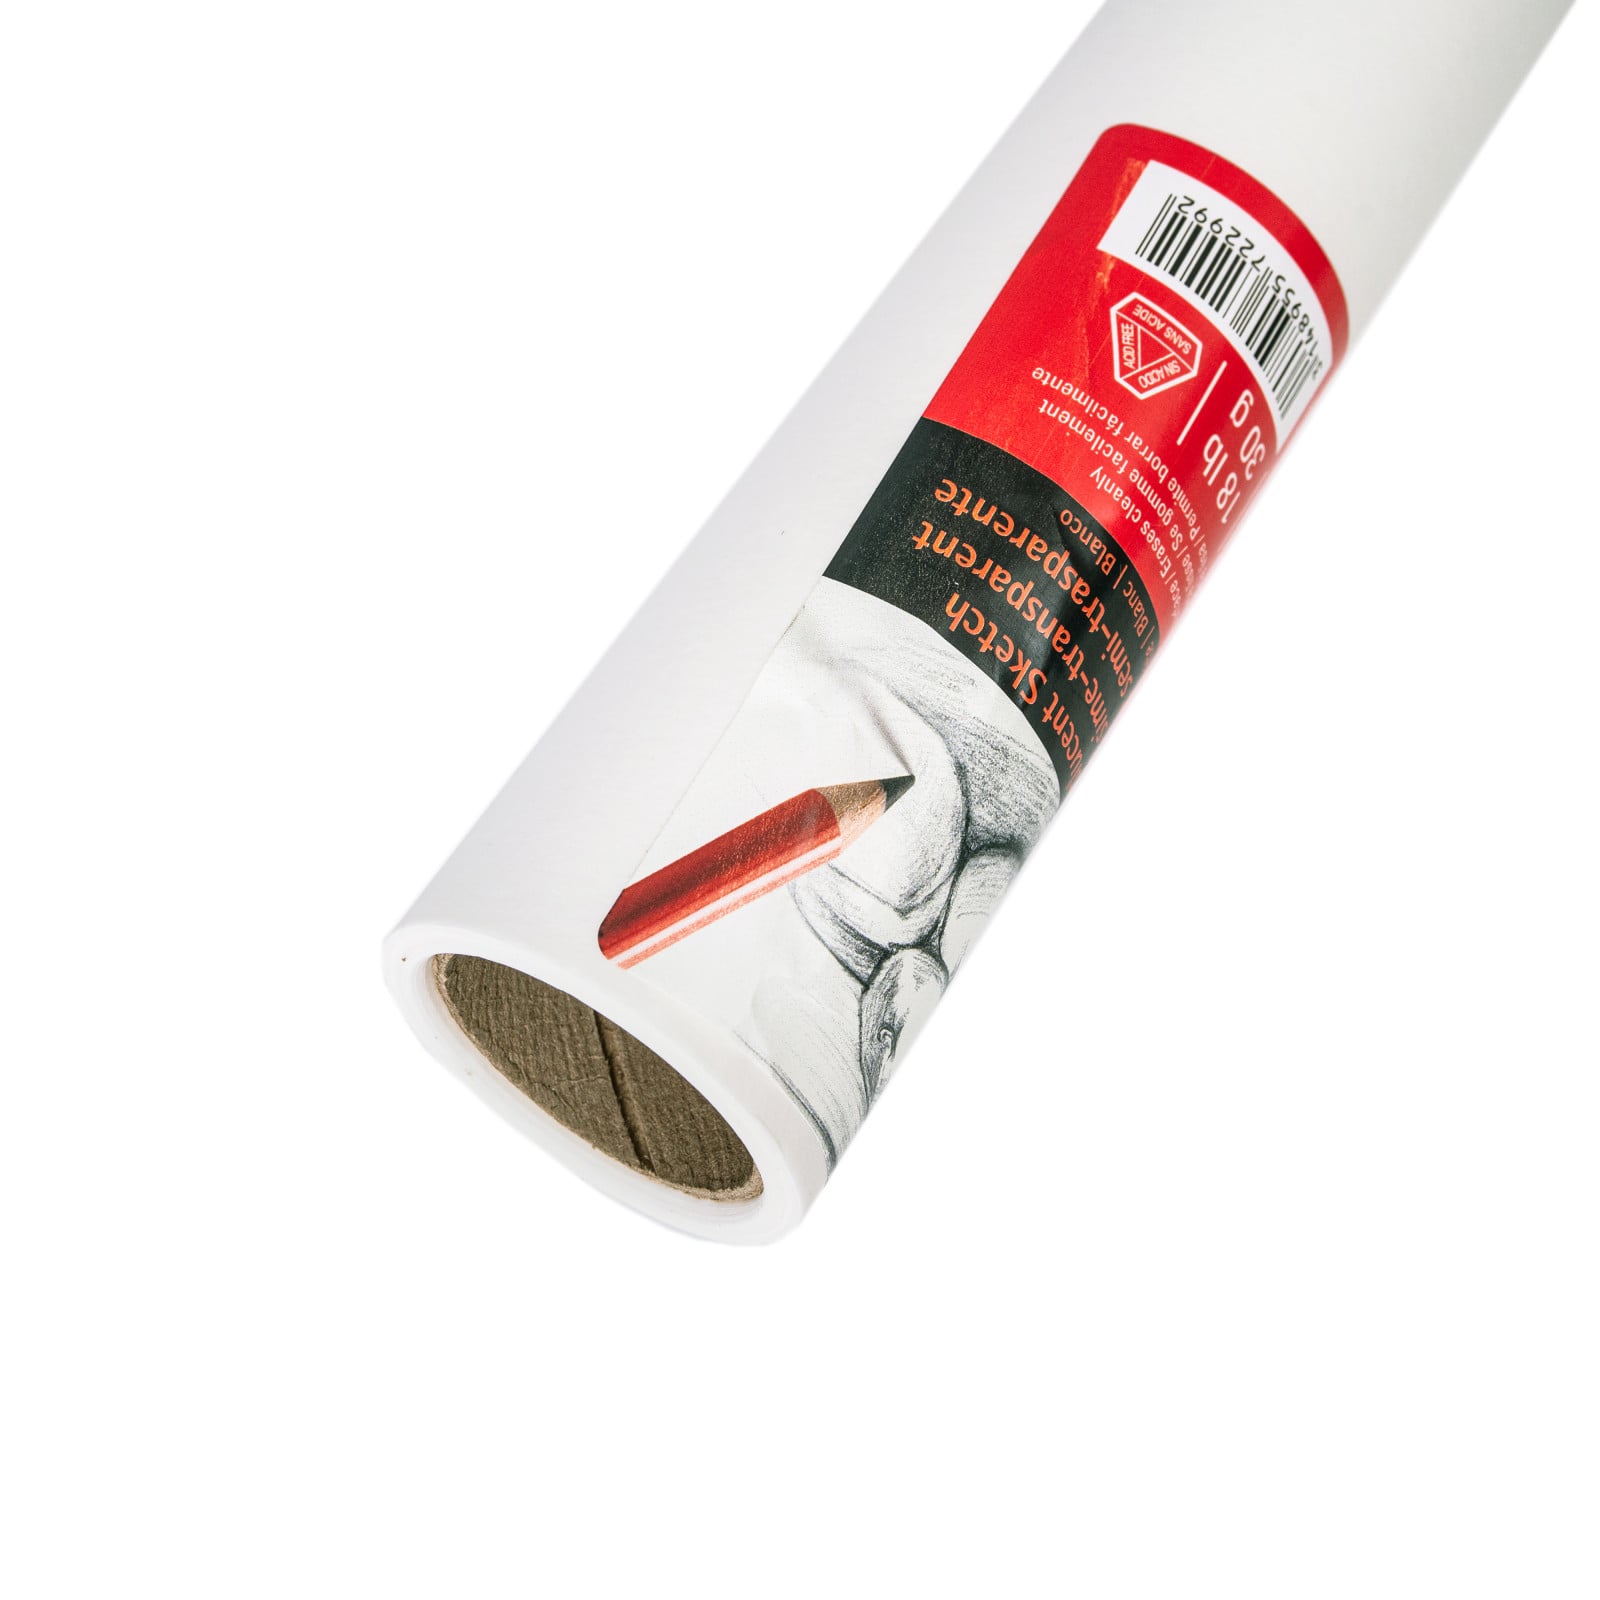 Seth-Cole Tracing Paper Roll - #56 White 12x50 Yard